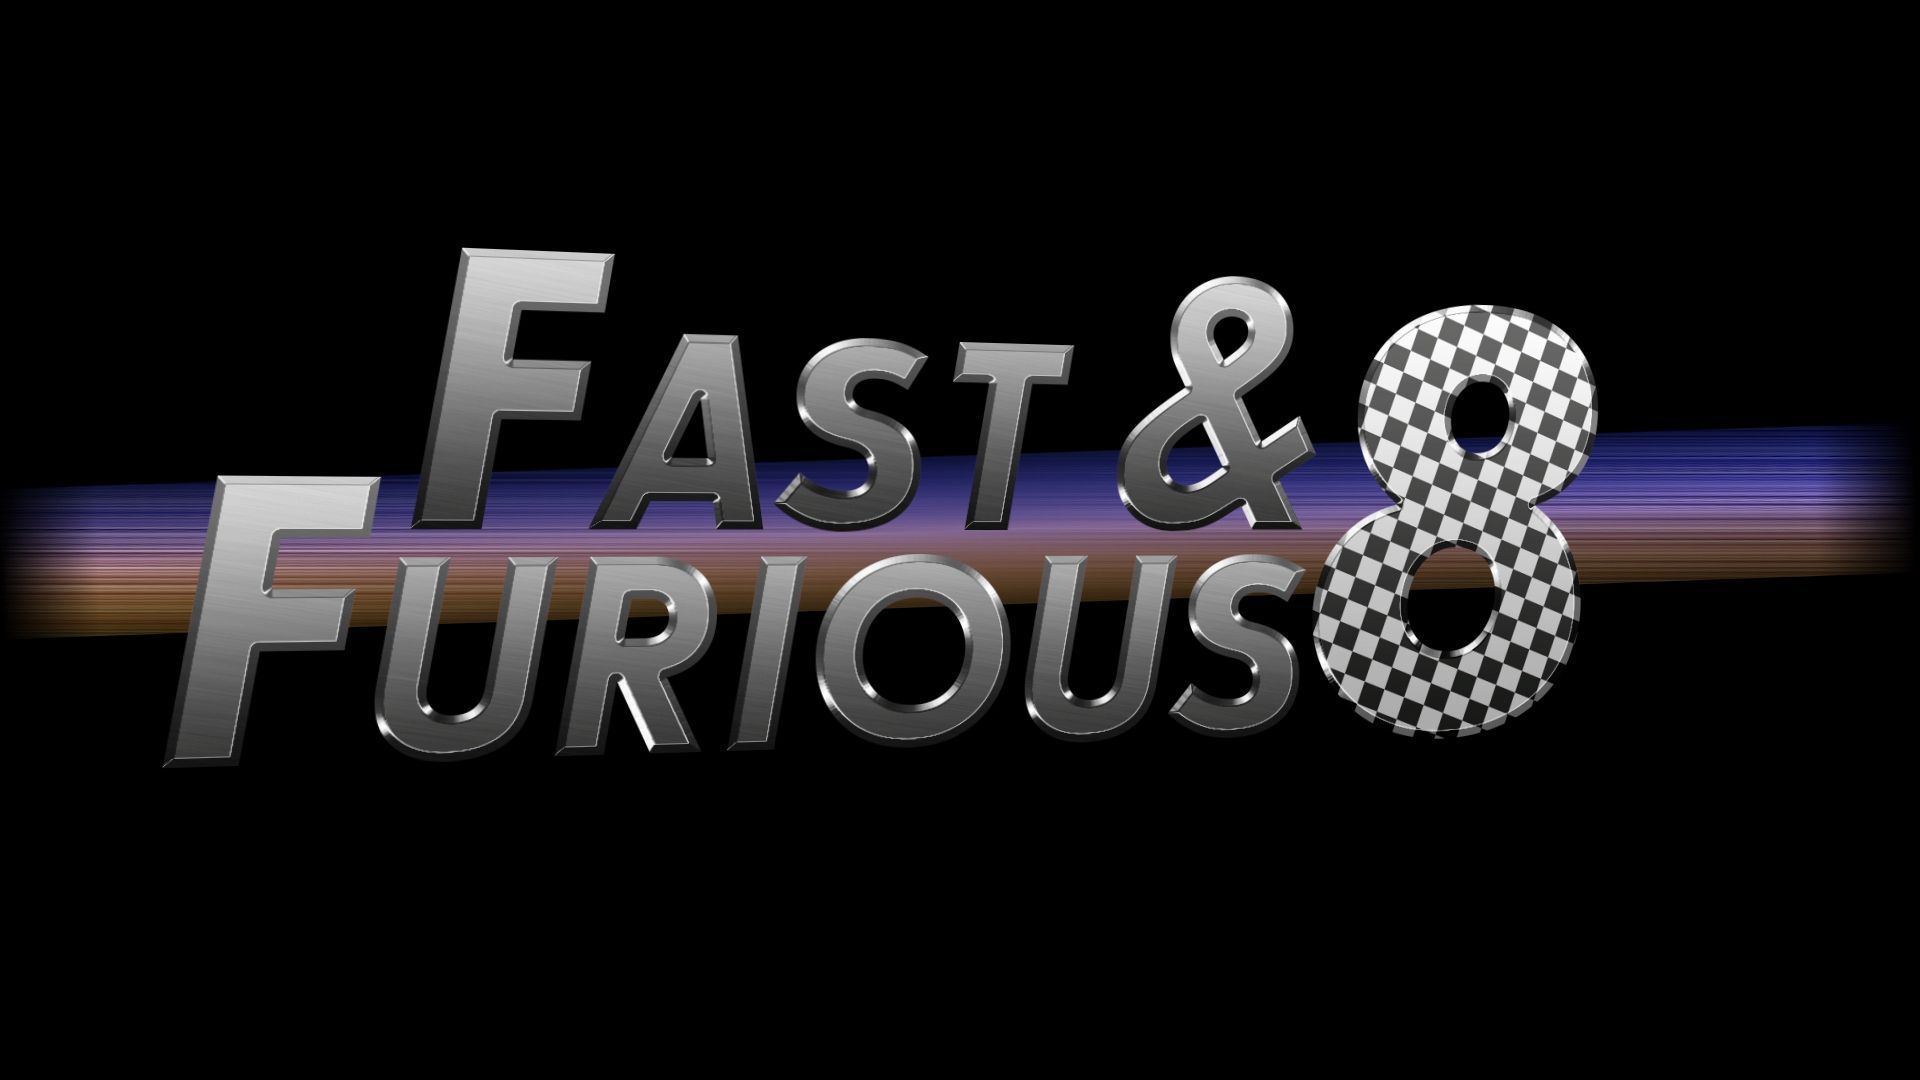 Fast and Furious WallpaperHD Wallpaper 1920×1080 Fast And Furious Wallpaper (57 Wallpaper). Adorable Wallpaper. Fast and furious, Wallpaper, Adorable